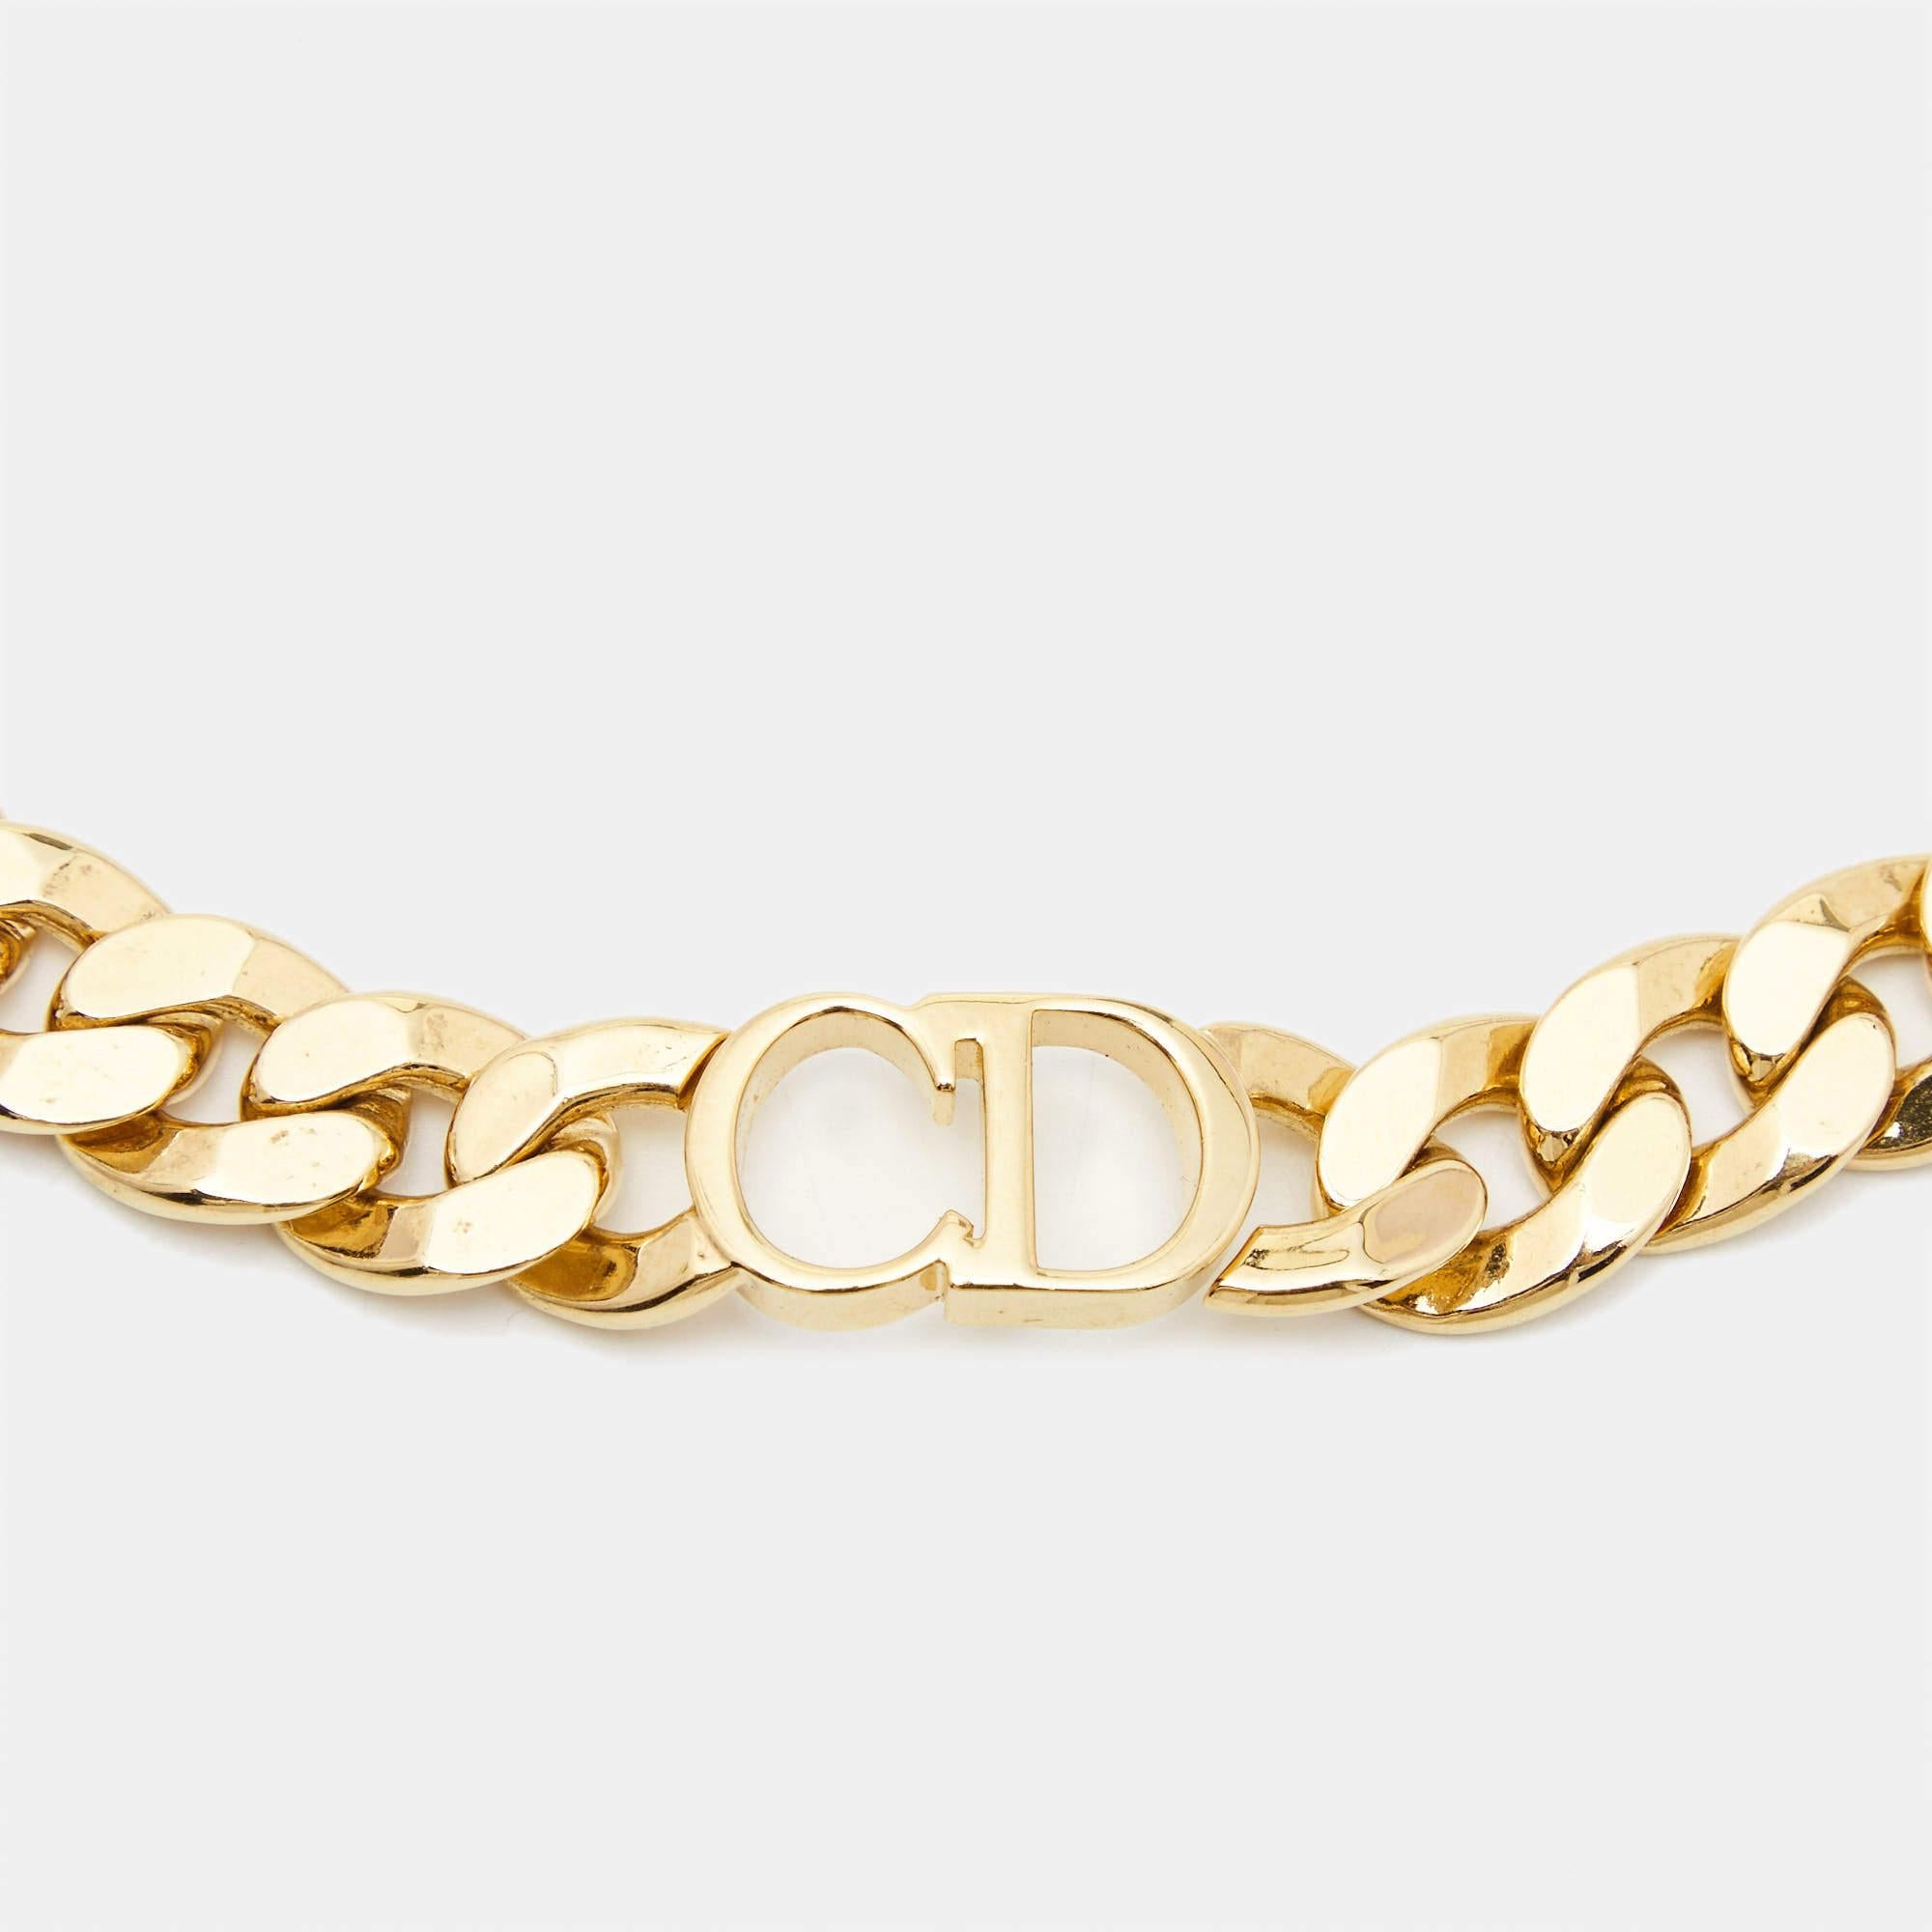 Add a statement finish to your outfit of the day with the Dior choker necklace. Created to be fashionable regardless of the season, the gold-tone metal necklace has a chain design and a CD logo center.

Includes: Original Dustbag, Original Invoice